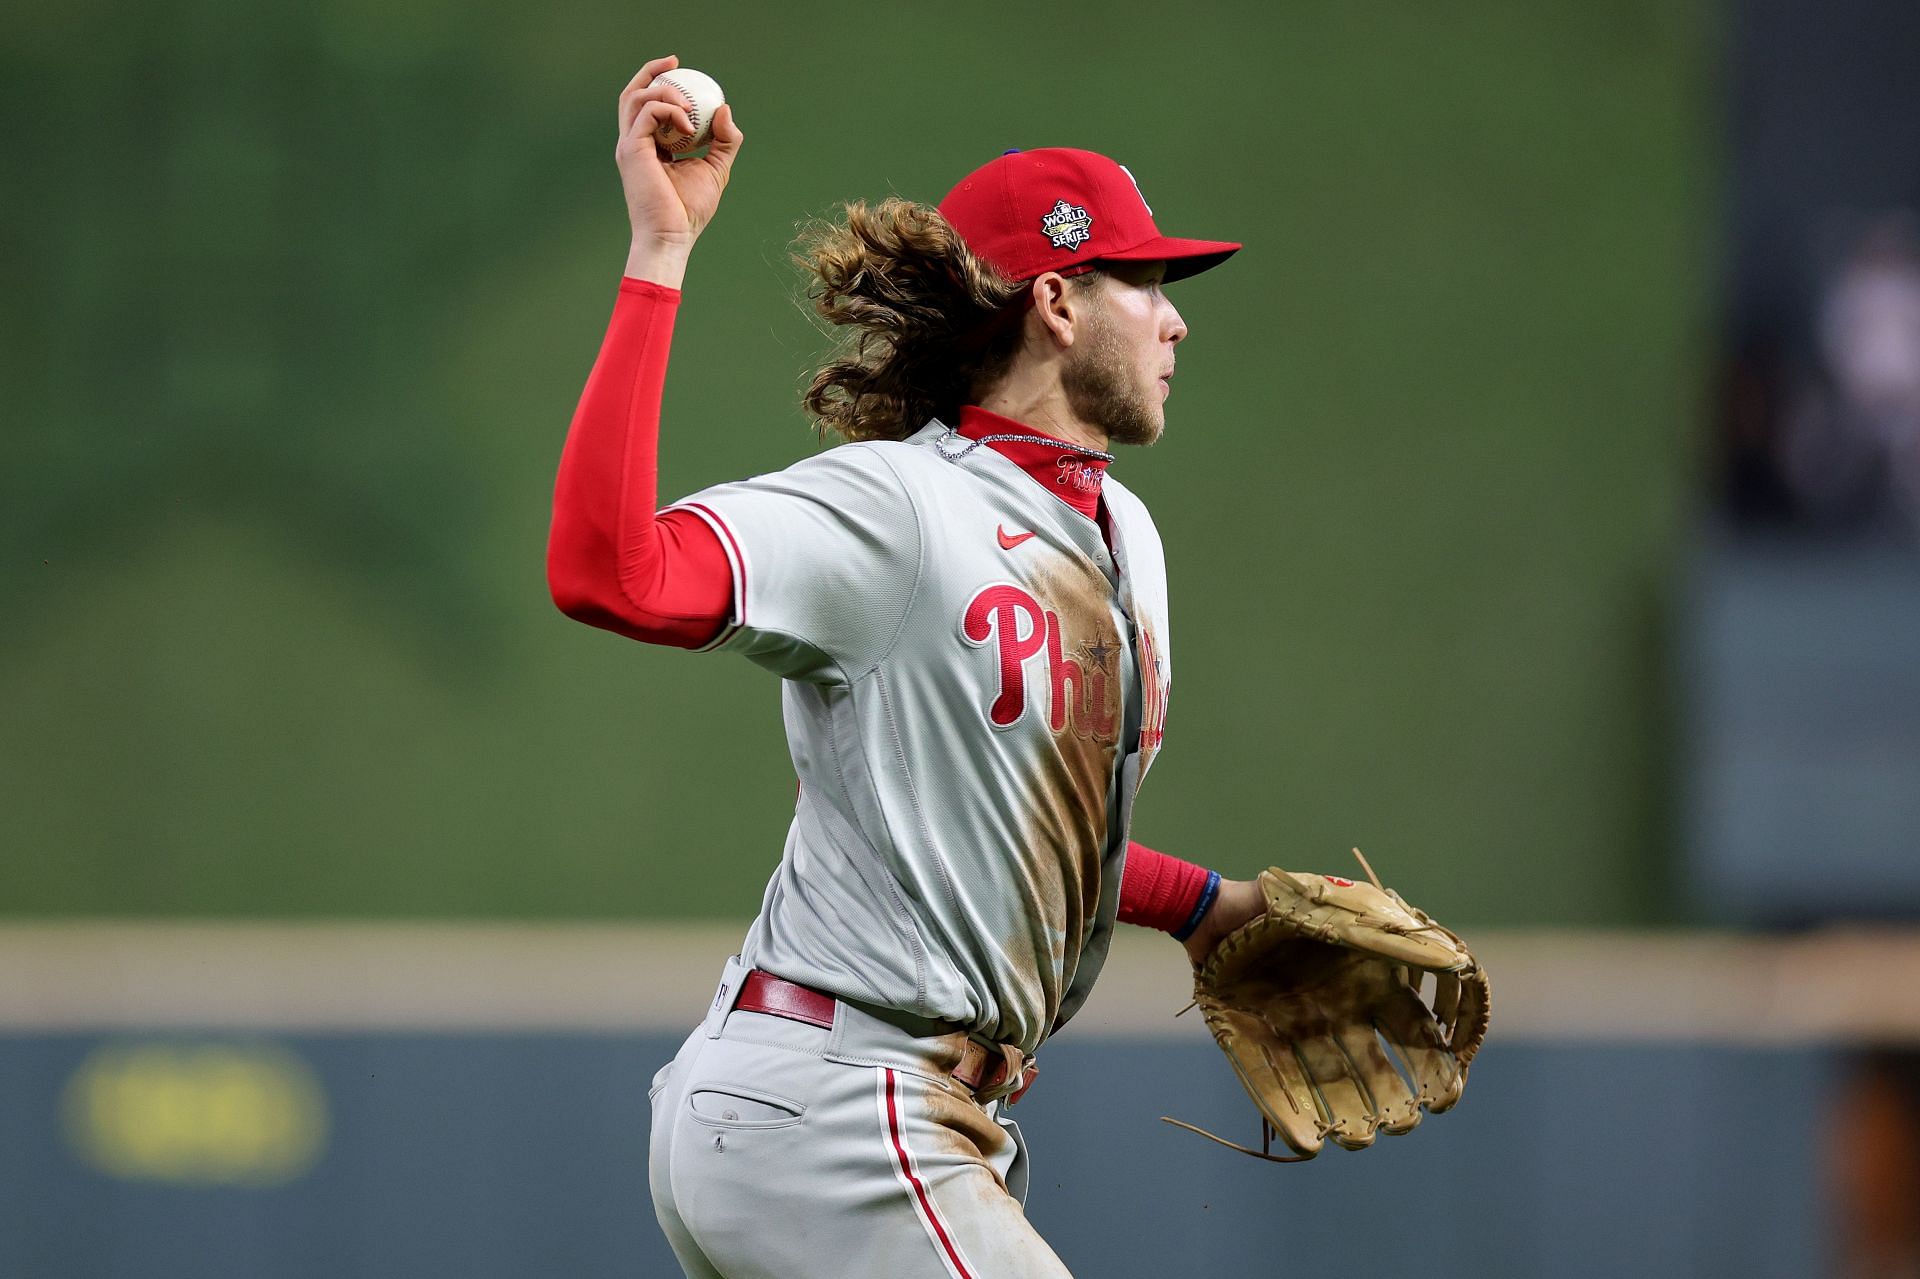 Alec Bohm is likely to rotate with Darick Hall and take Hoskins&rsquo; 1B